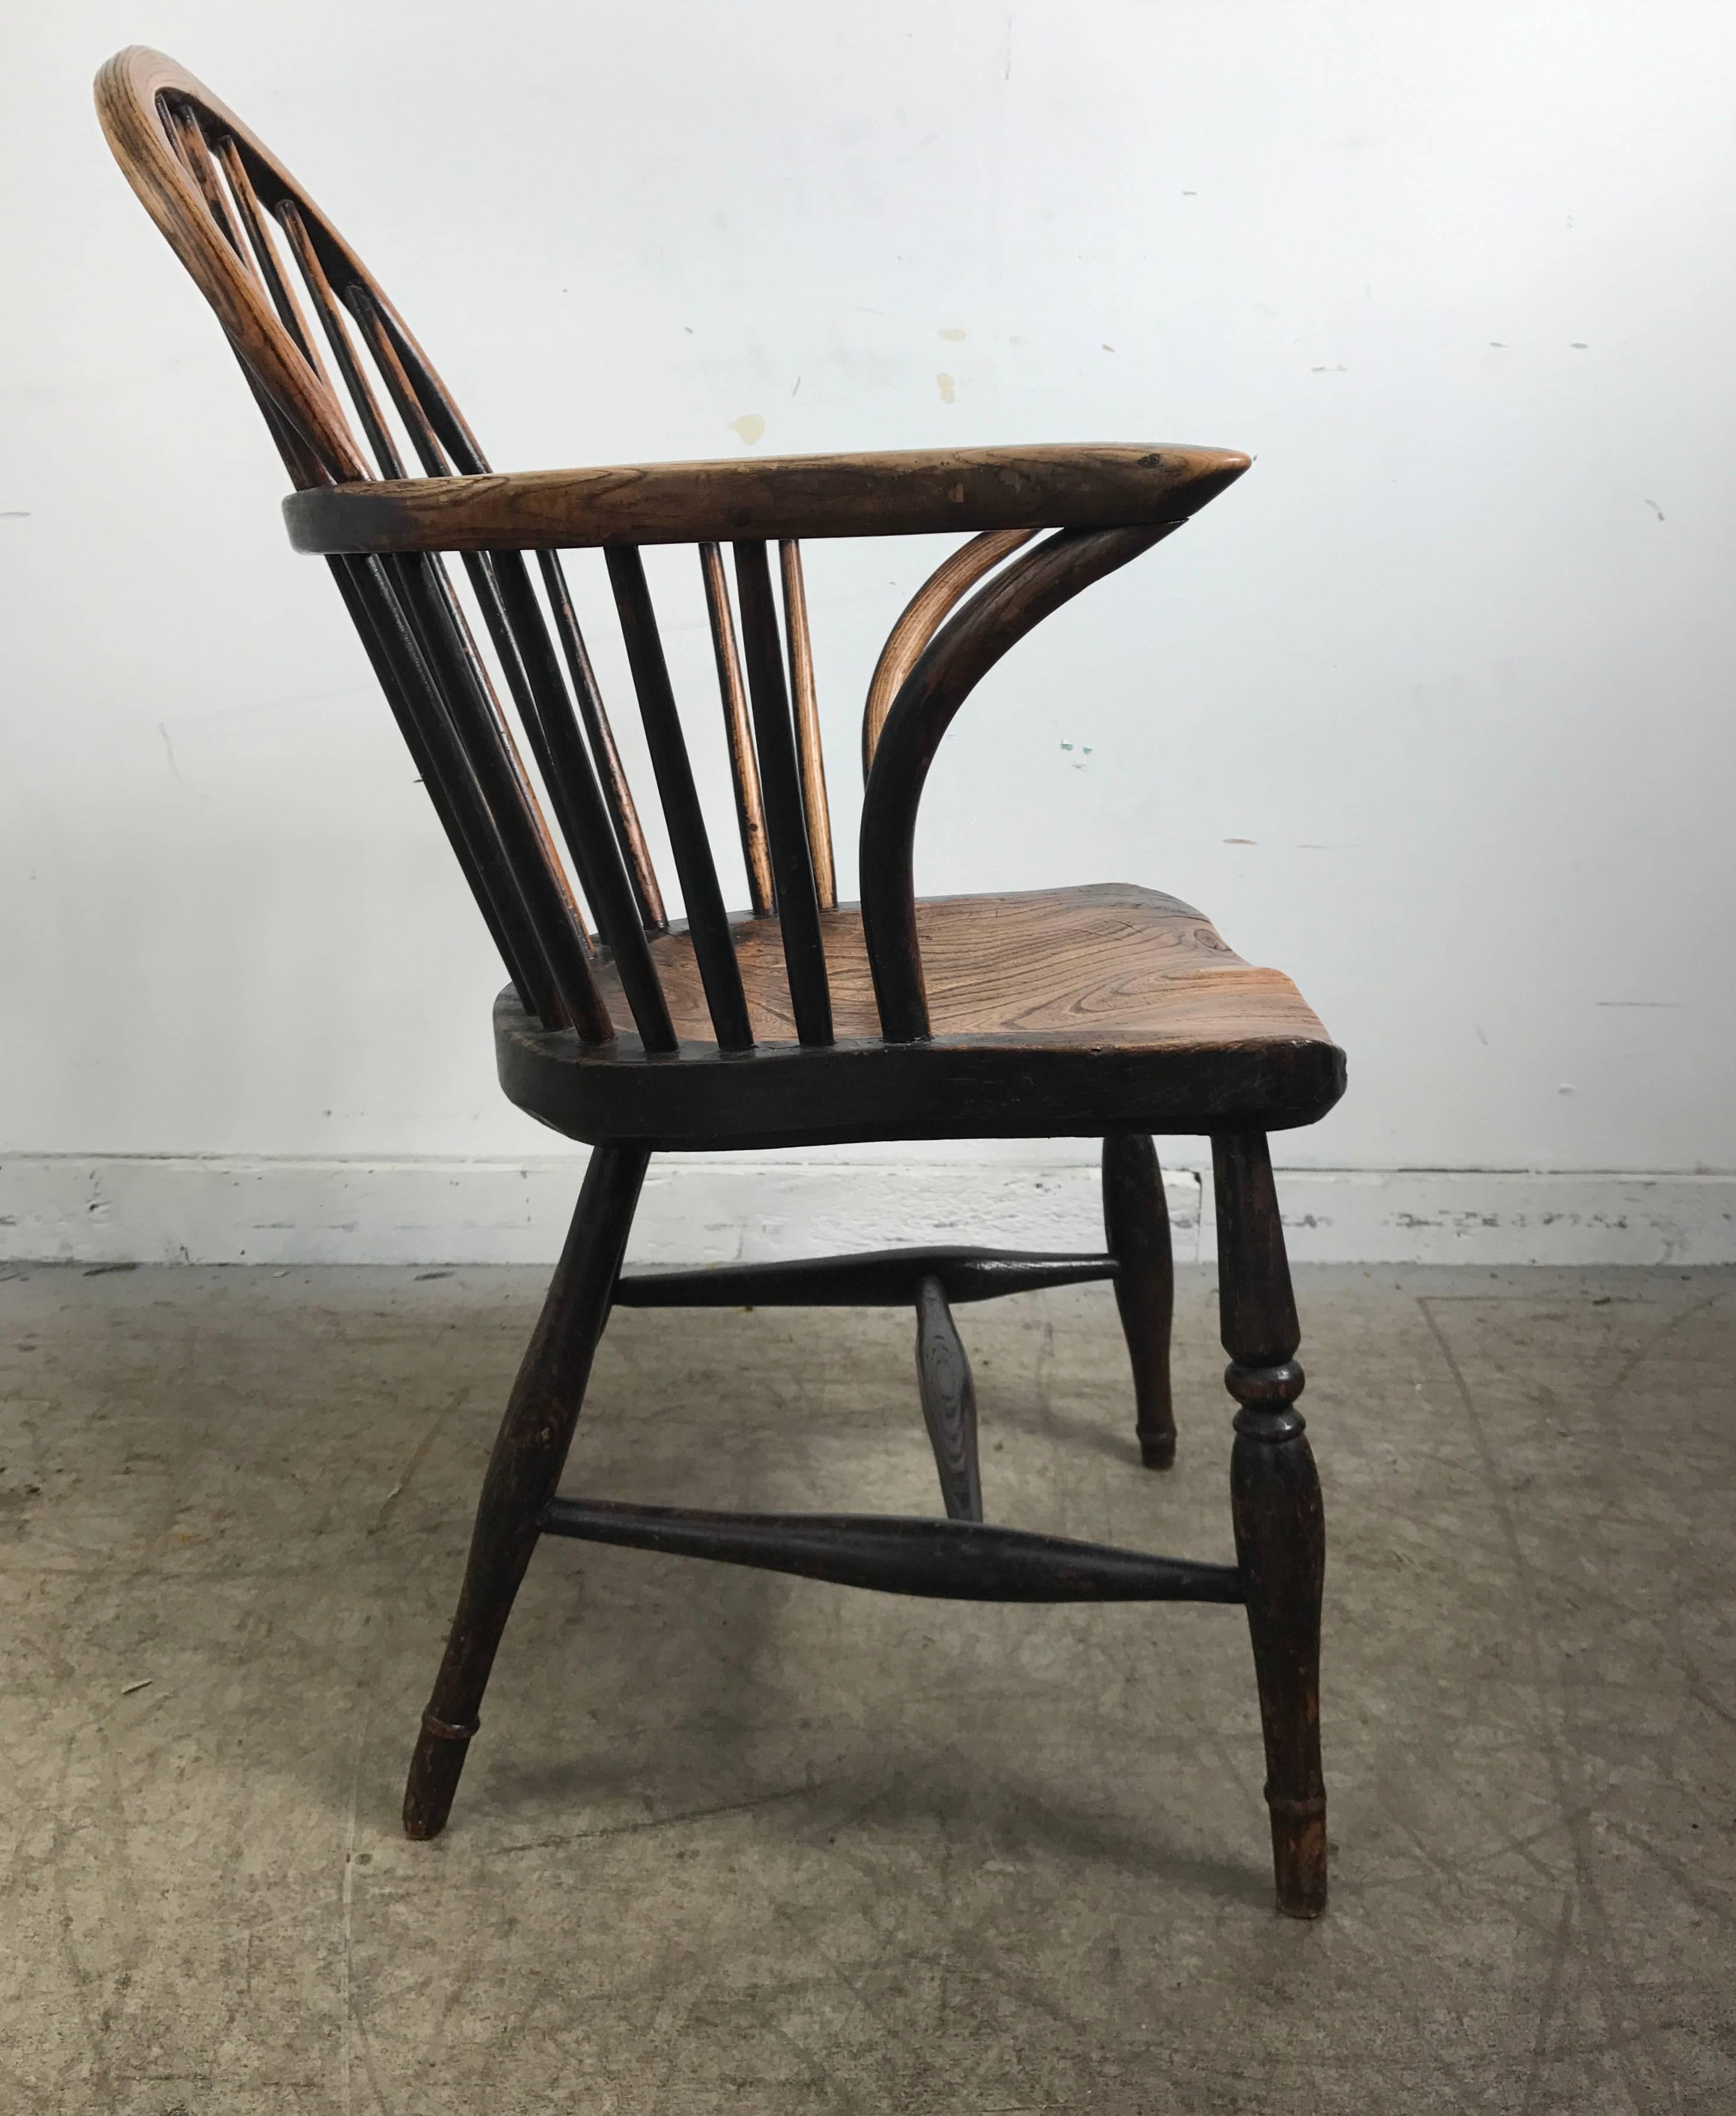 Hand-Crafted Classic English Elm Antique Windsor Chair